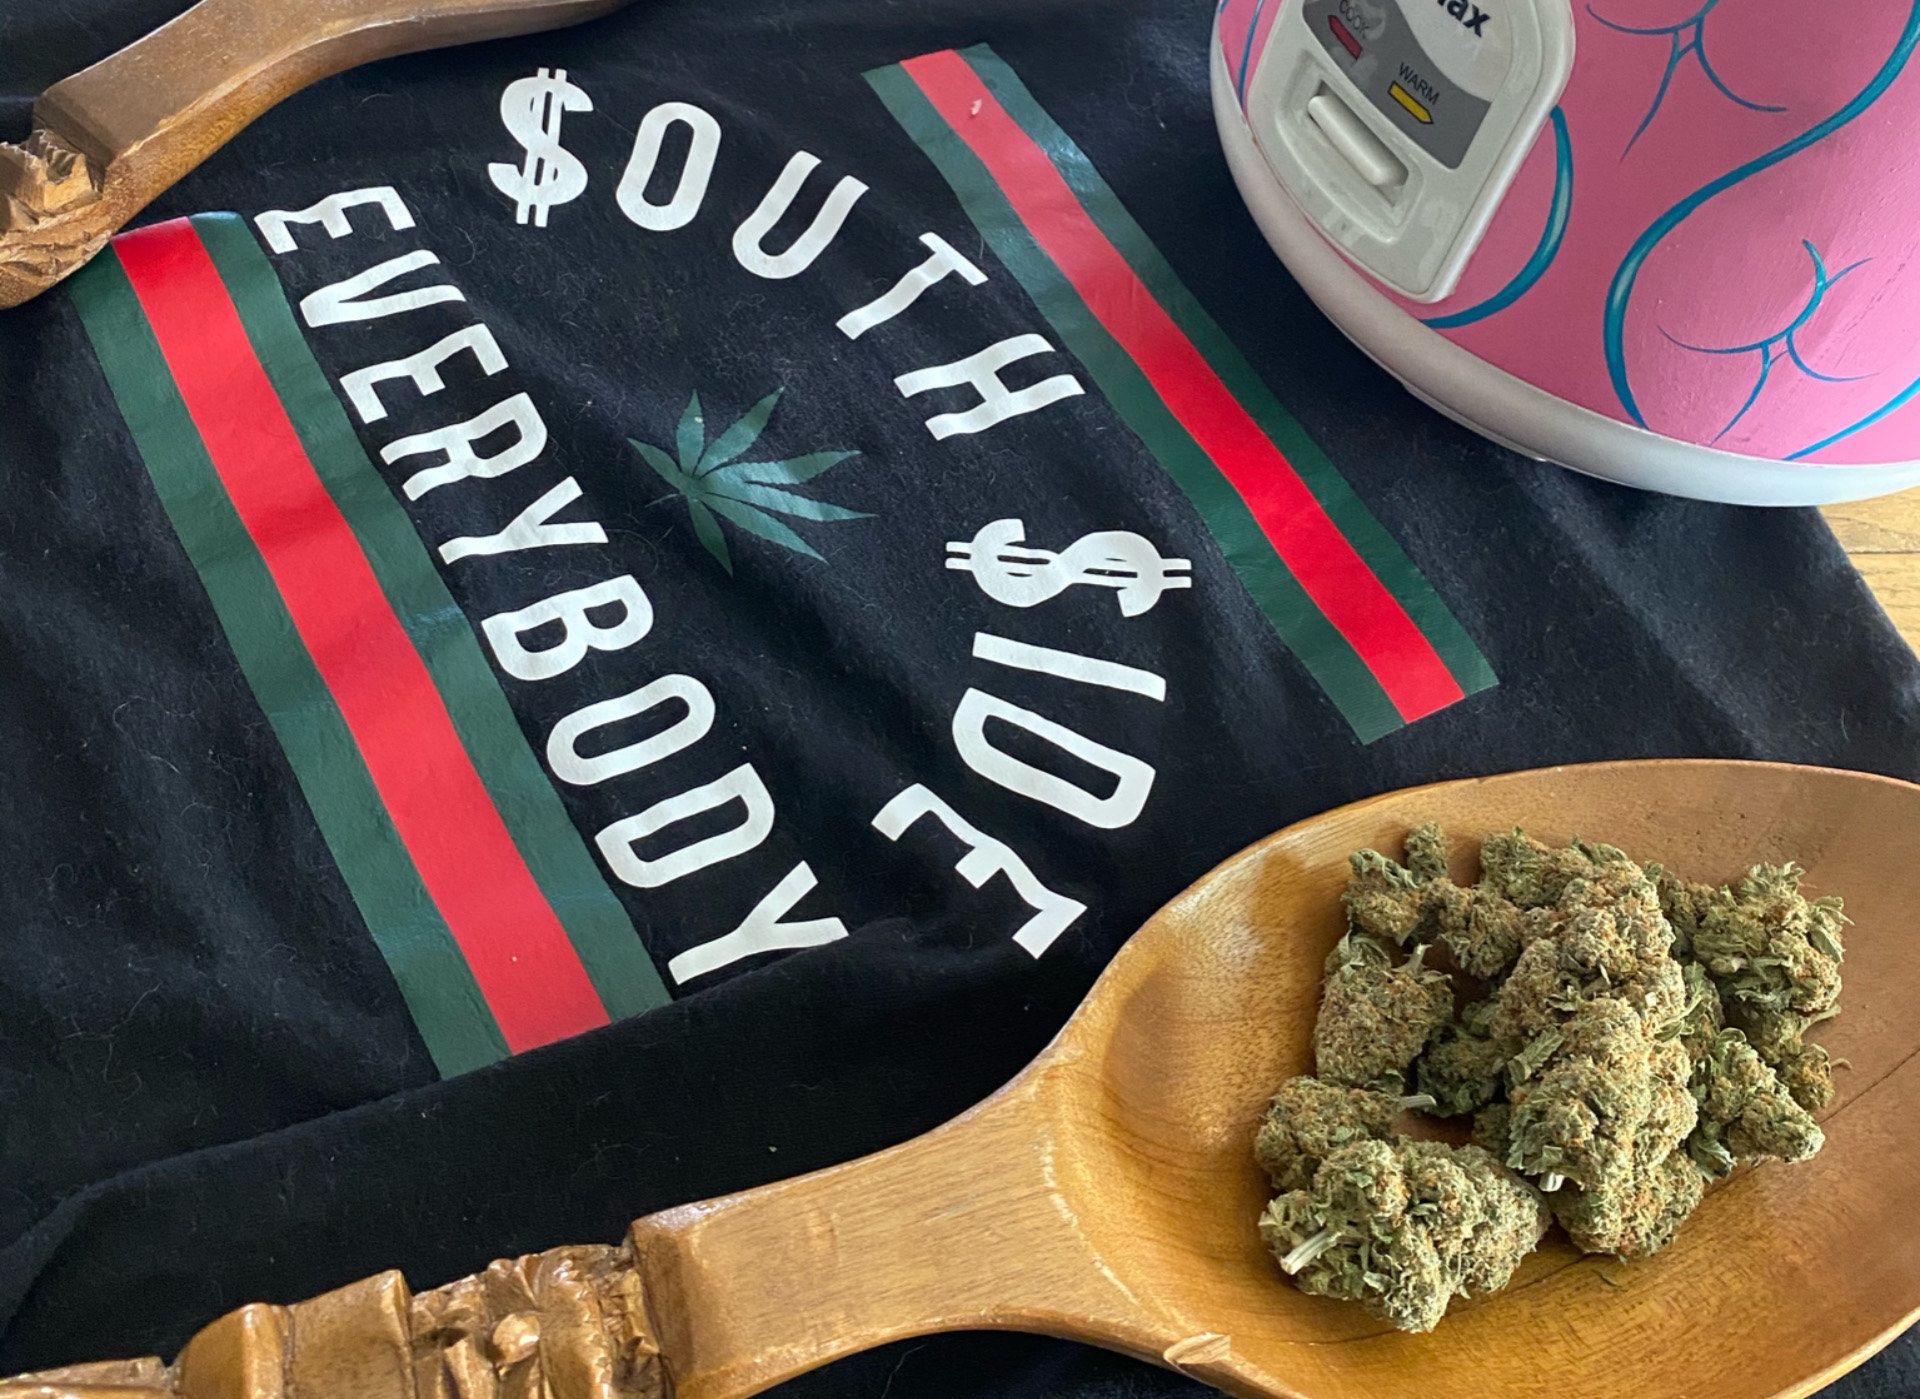 A wooden spoon with cannabis and a t-shirt reading “south side vs. everybody” using a weed plant instead of “Vs.”